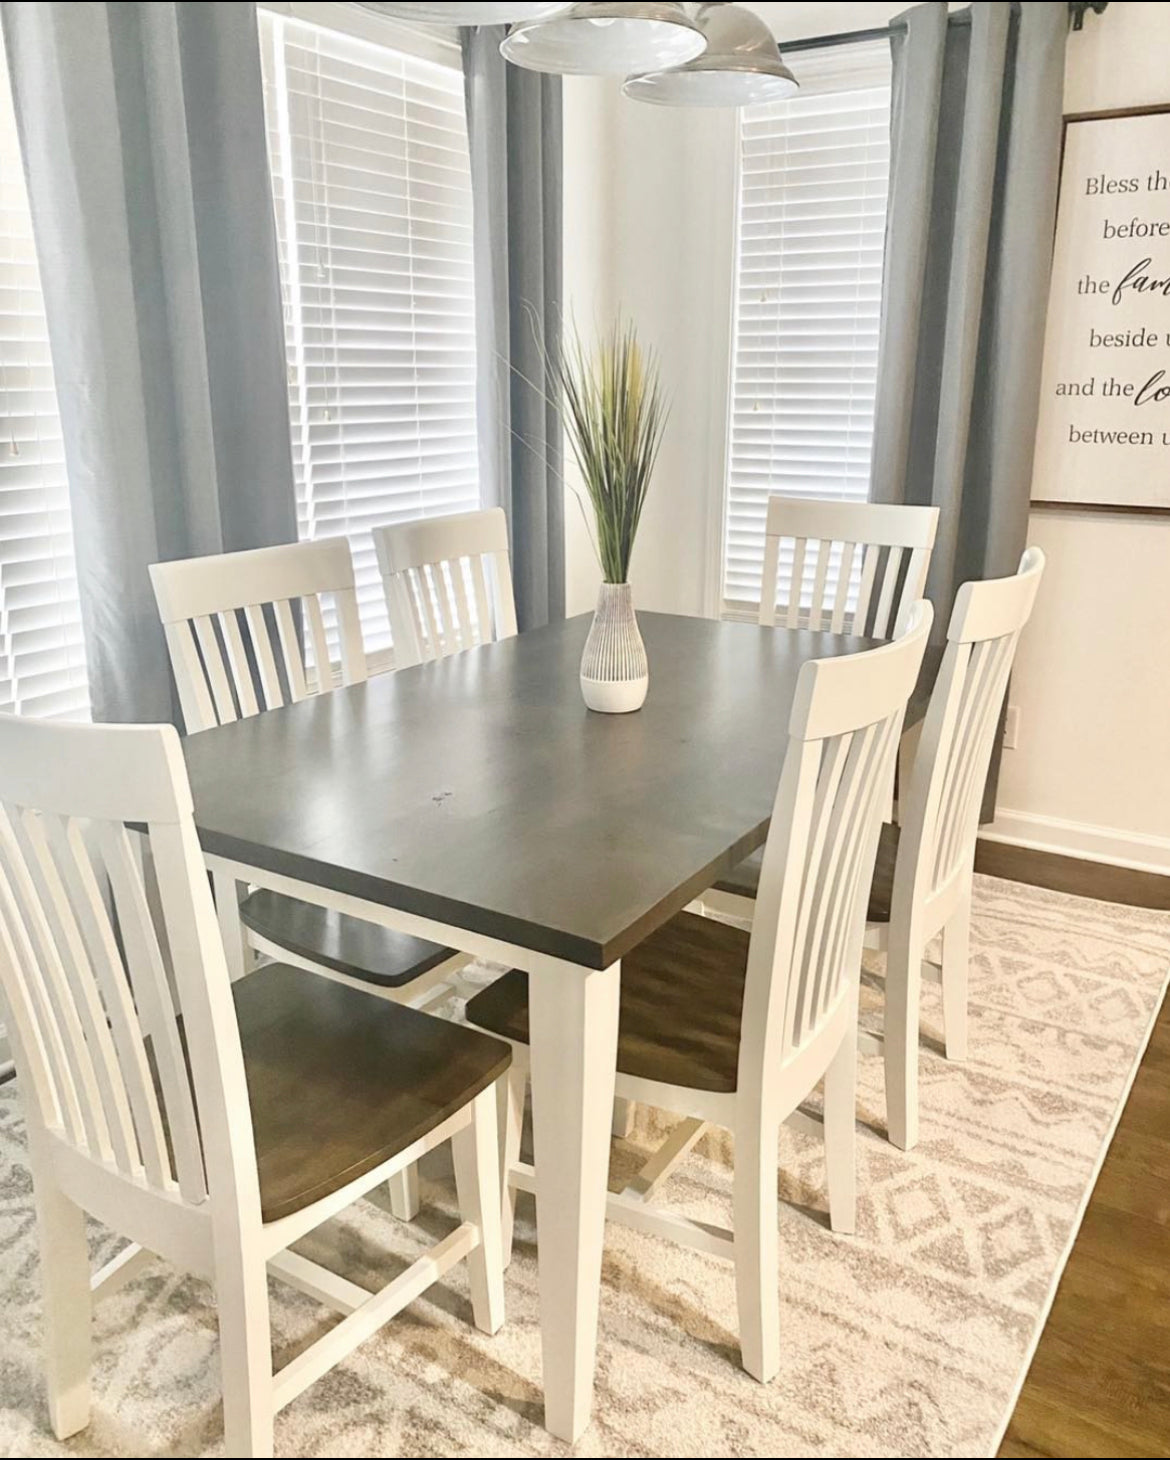 Pictured with a 5' L x 42" Rustic Alder top with Aged Barrel stain and a White painted base. Pictured with 6 Mission Dining Chairs.